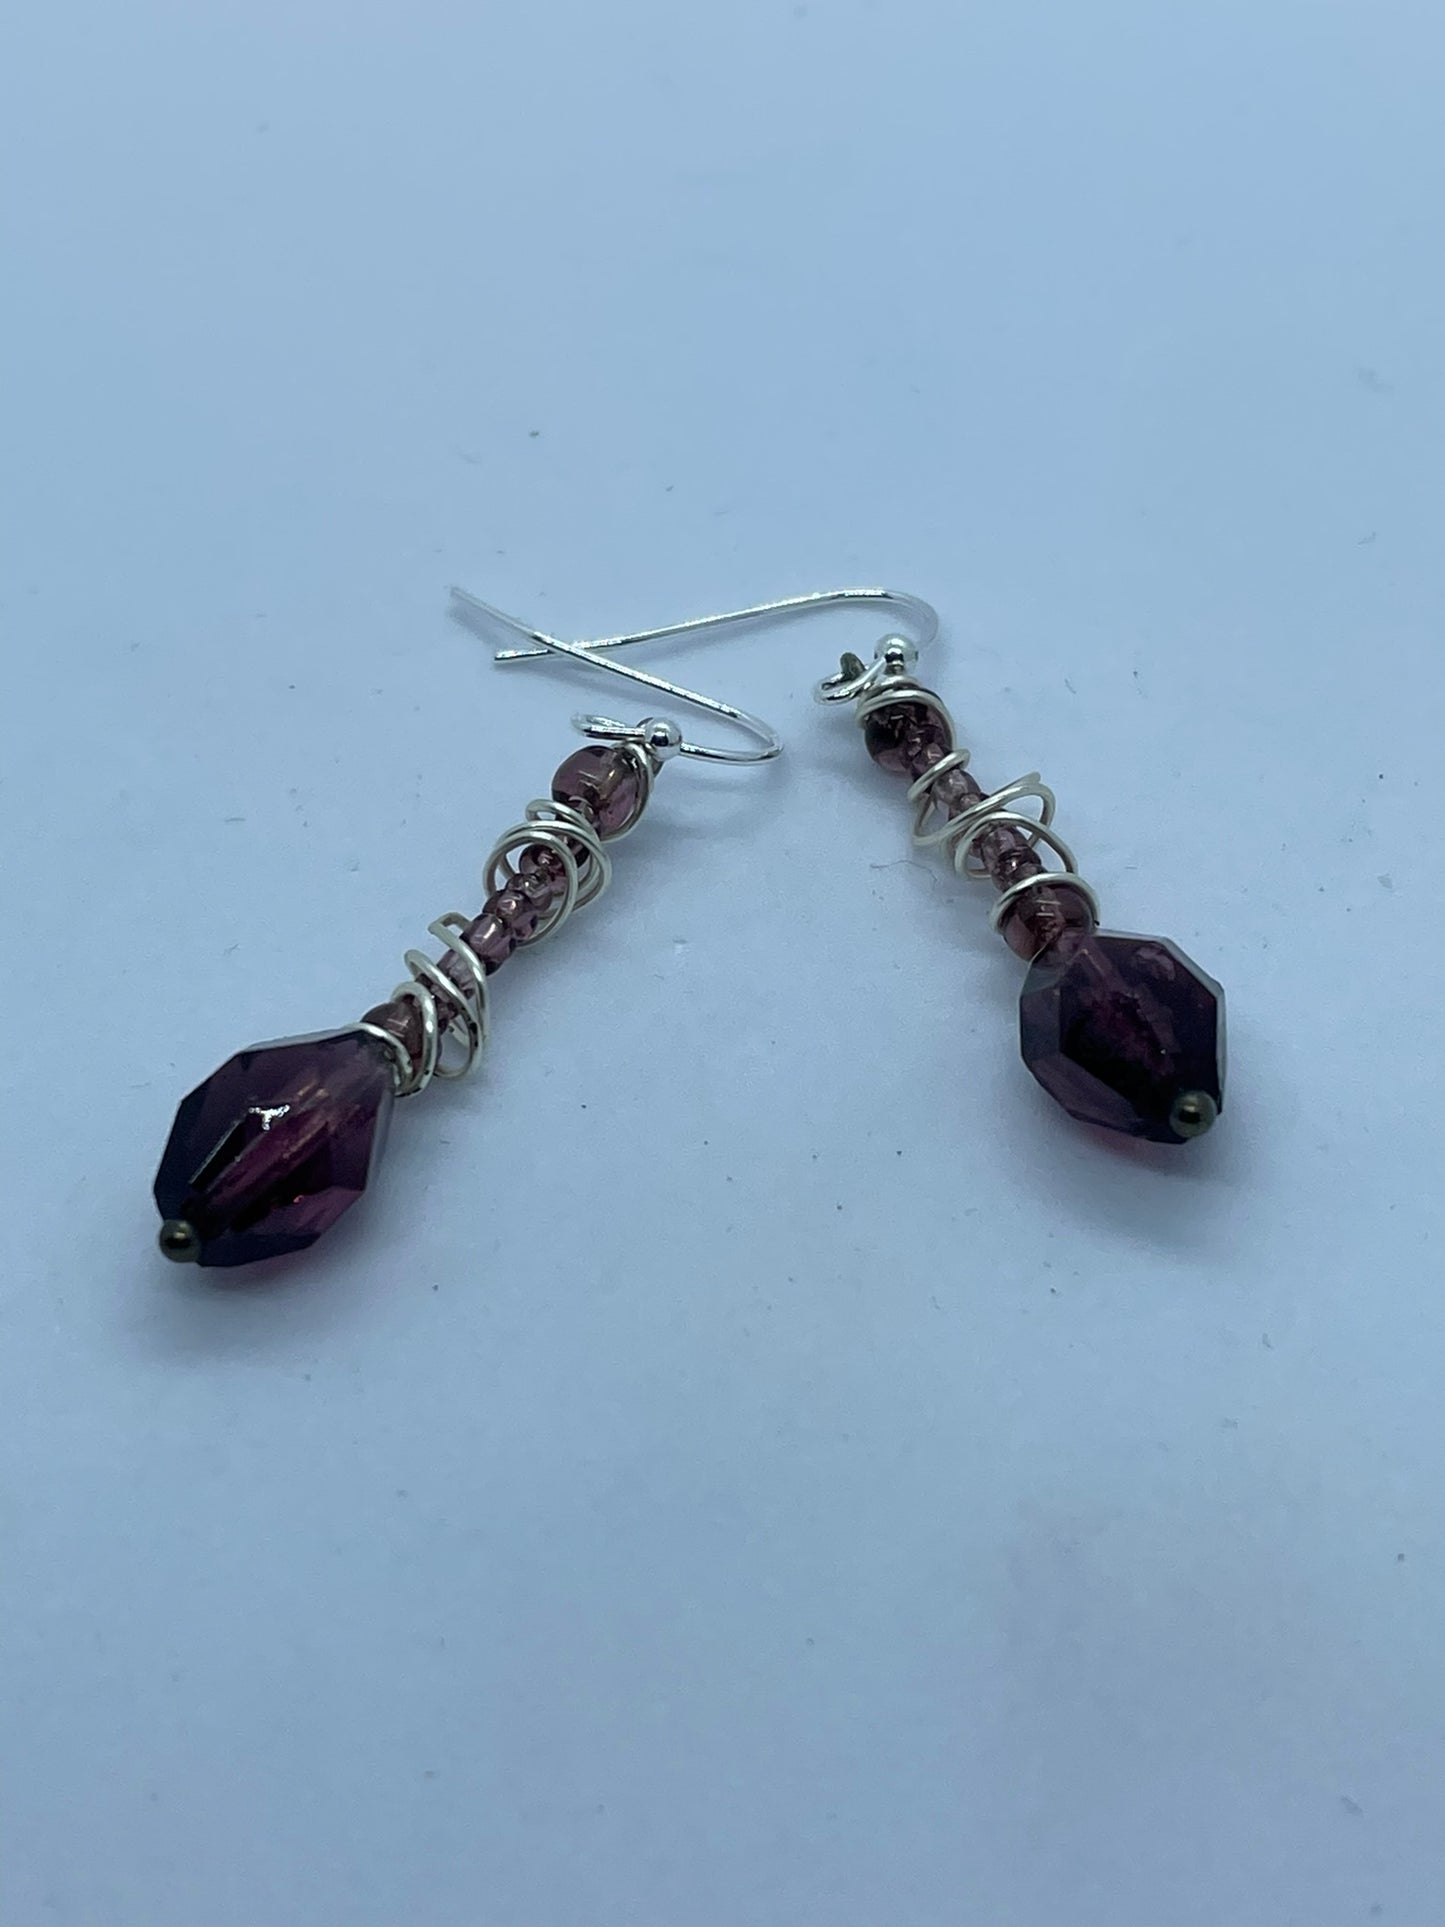 Wire & burgundy bead earrings with silver wire twist